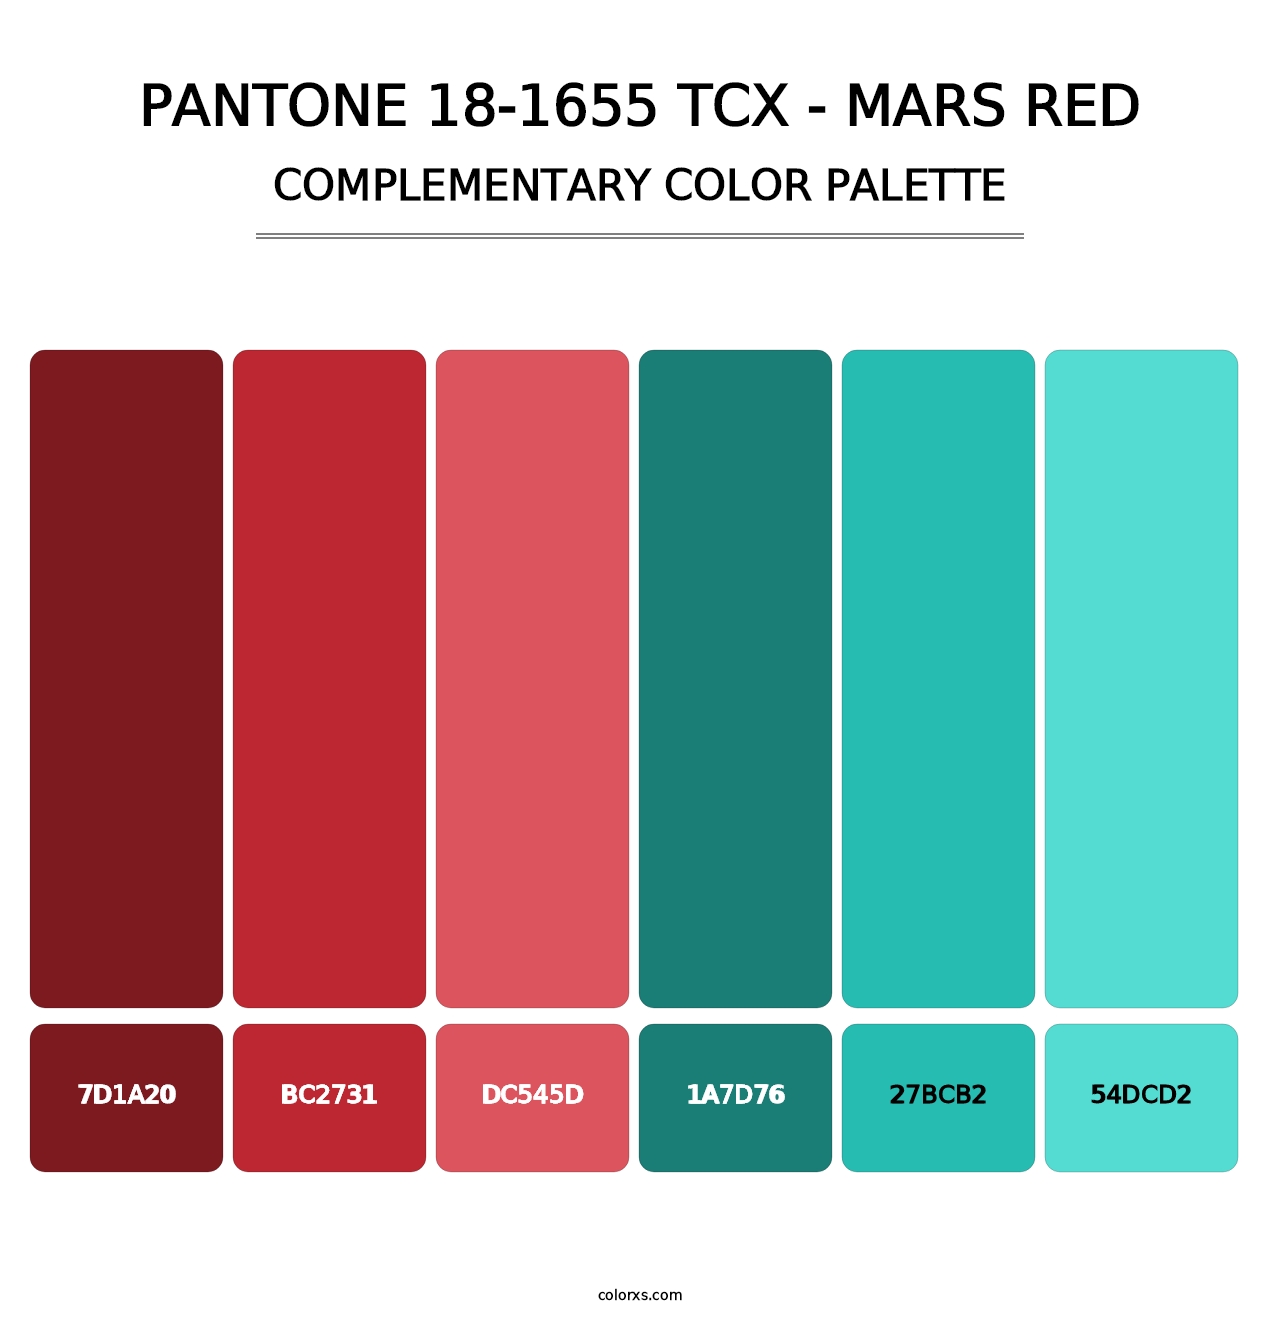 PANTONE 18-1655 TCX - Mars Red - Complementary Color Palette